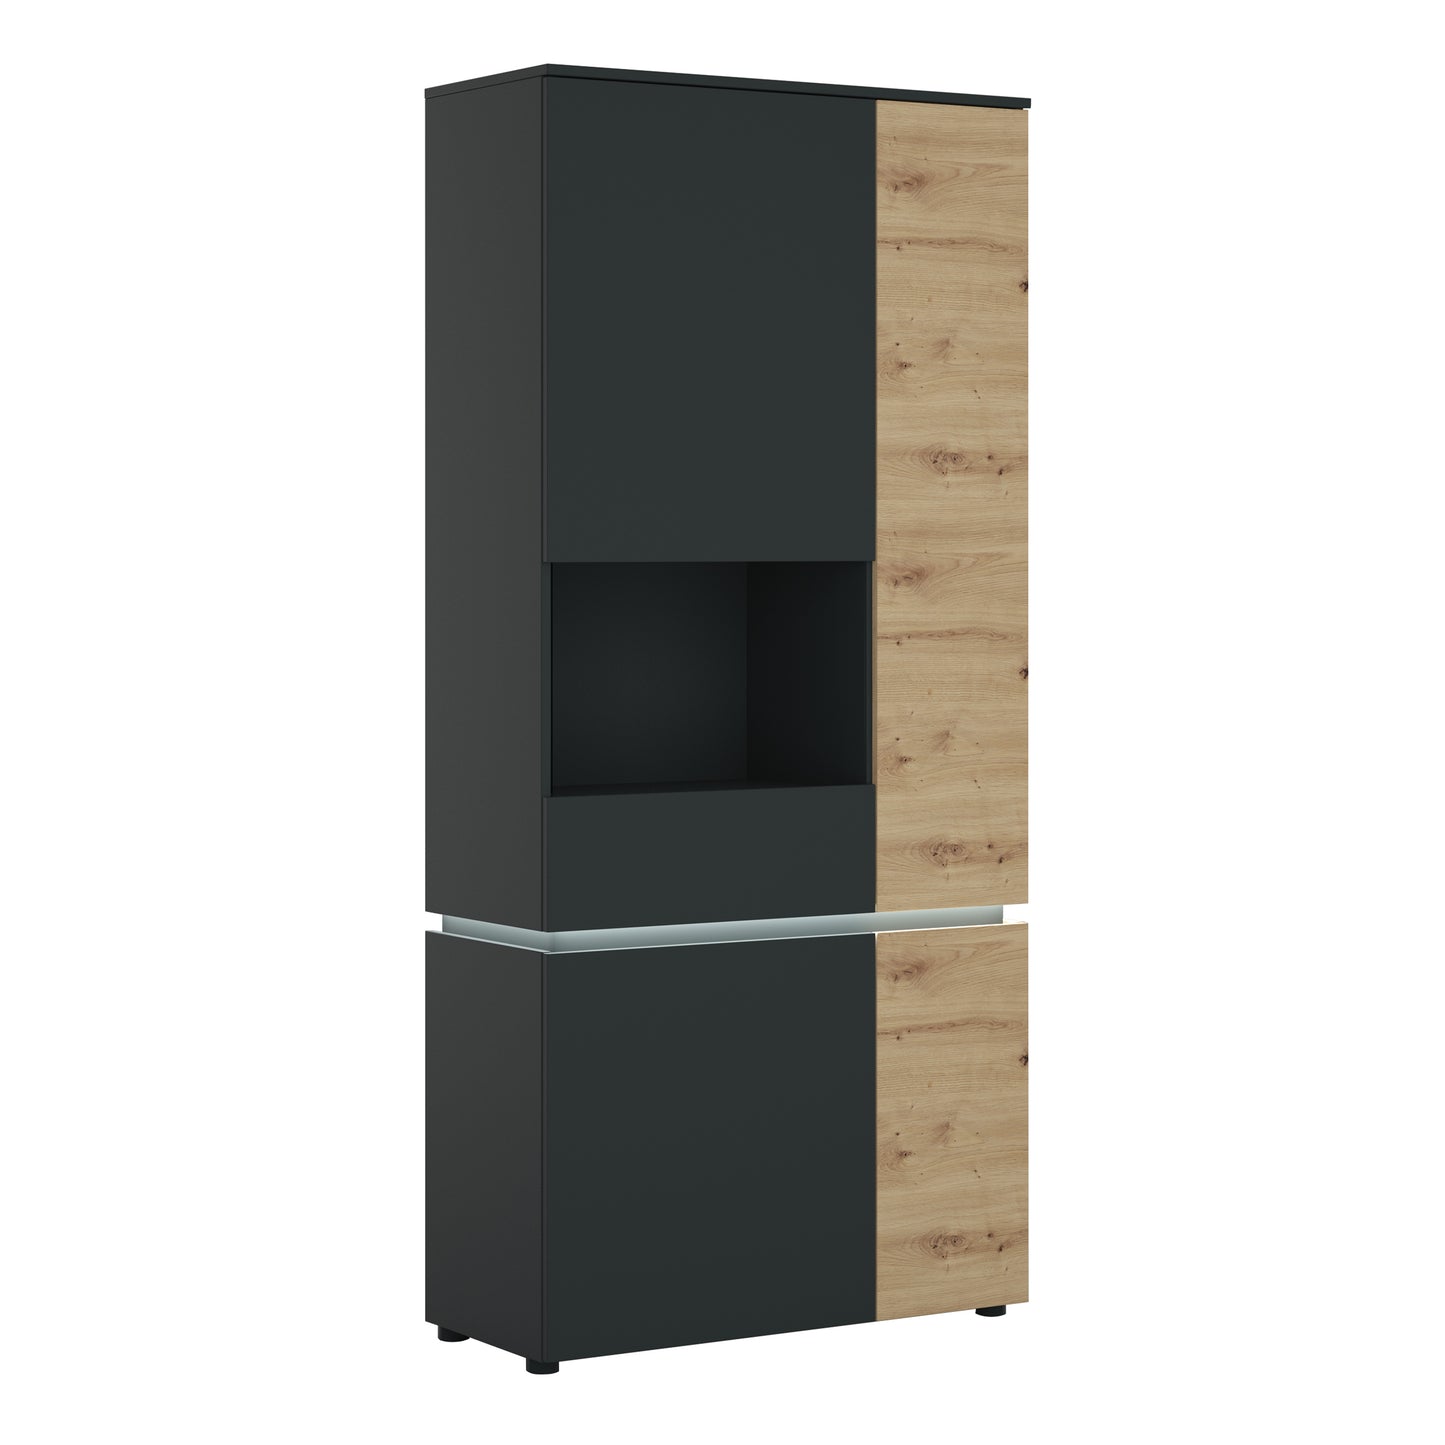 Luci Dark Luci 4 door tall display cabinet LH (including LED lighting) in Platinum and Oak